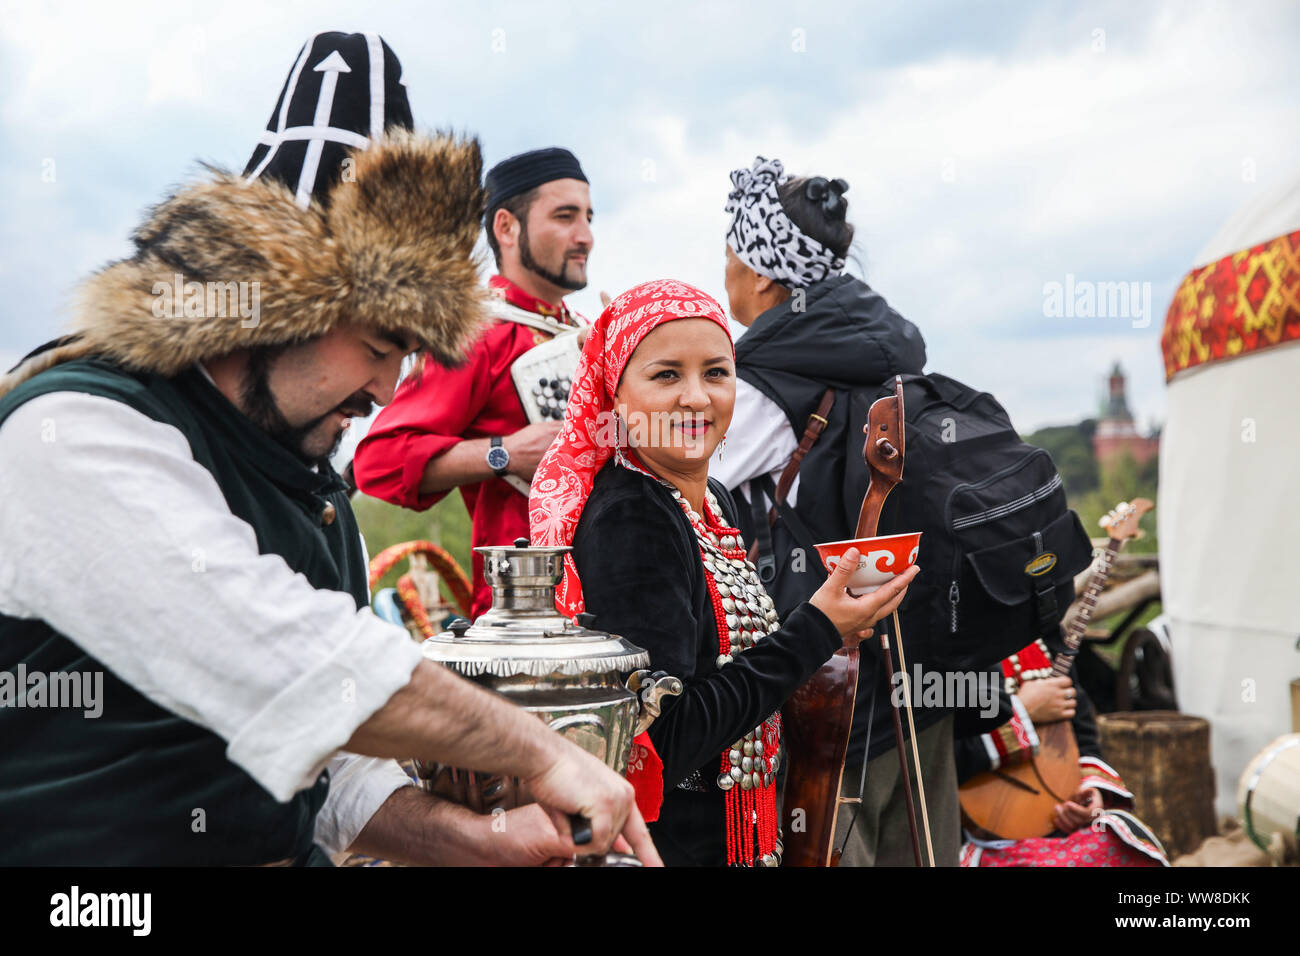 Moscow, Russia. 13th Sep, 2019. Representatives of Bashkortostan Republic show a traditional tea ceremony at their site during the Russian Geographical Society Festival at Zaryadye park in Moscow, Russia, on Sept. 13, 2019. The 4th Russian Geographical Society Festival is held from Sept. 13 to Sept. 22 in Moscow. Visitors will be able to get acquainted with the diverse nature and cultural heritage of Russia during the festival. Credit: Maxim Chernavsky/Xinhua Stock Photo